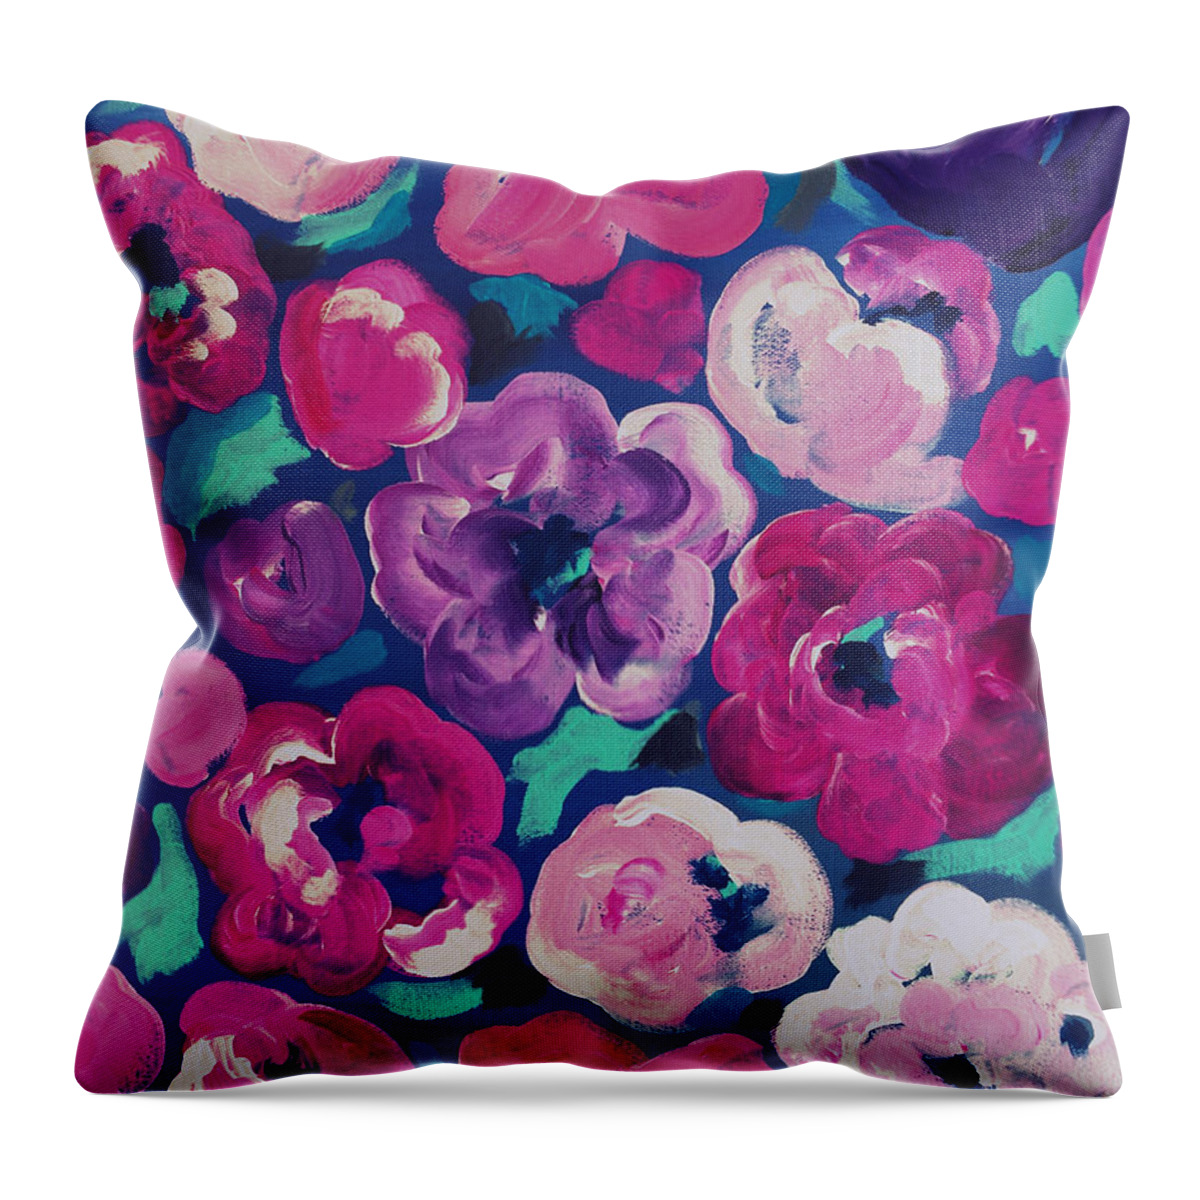 Floral Art Throw Pillow featuring the painting Crush by Beth Ann Scott